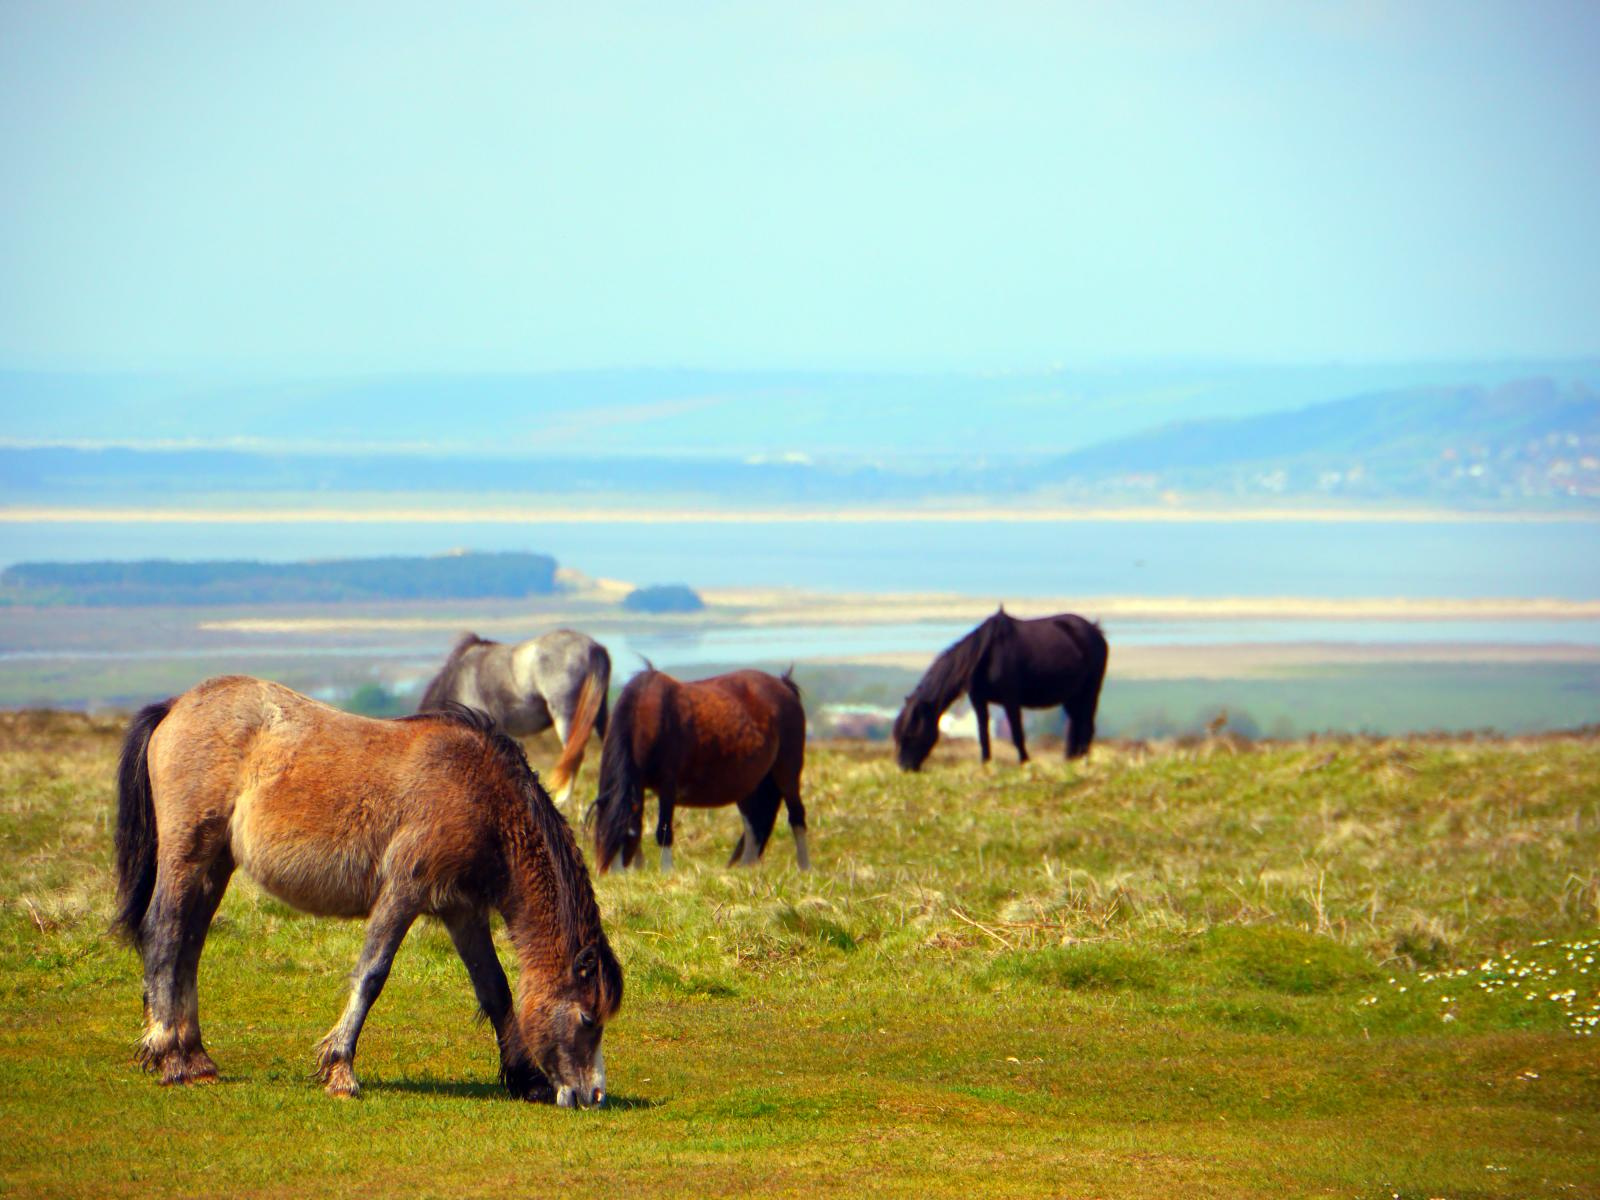 Wild horses near Arthur's Stone with the Loughnor Estuary in the background © Flickr CC - Gareth Lovering photography